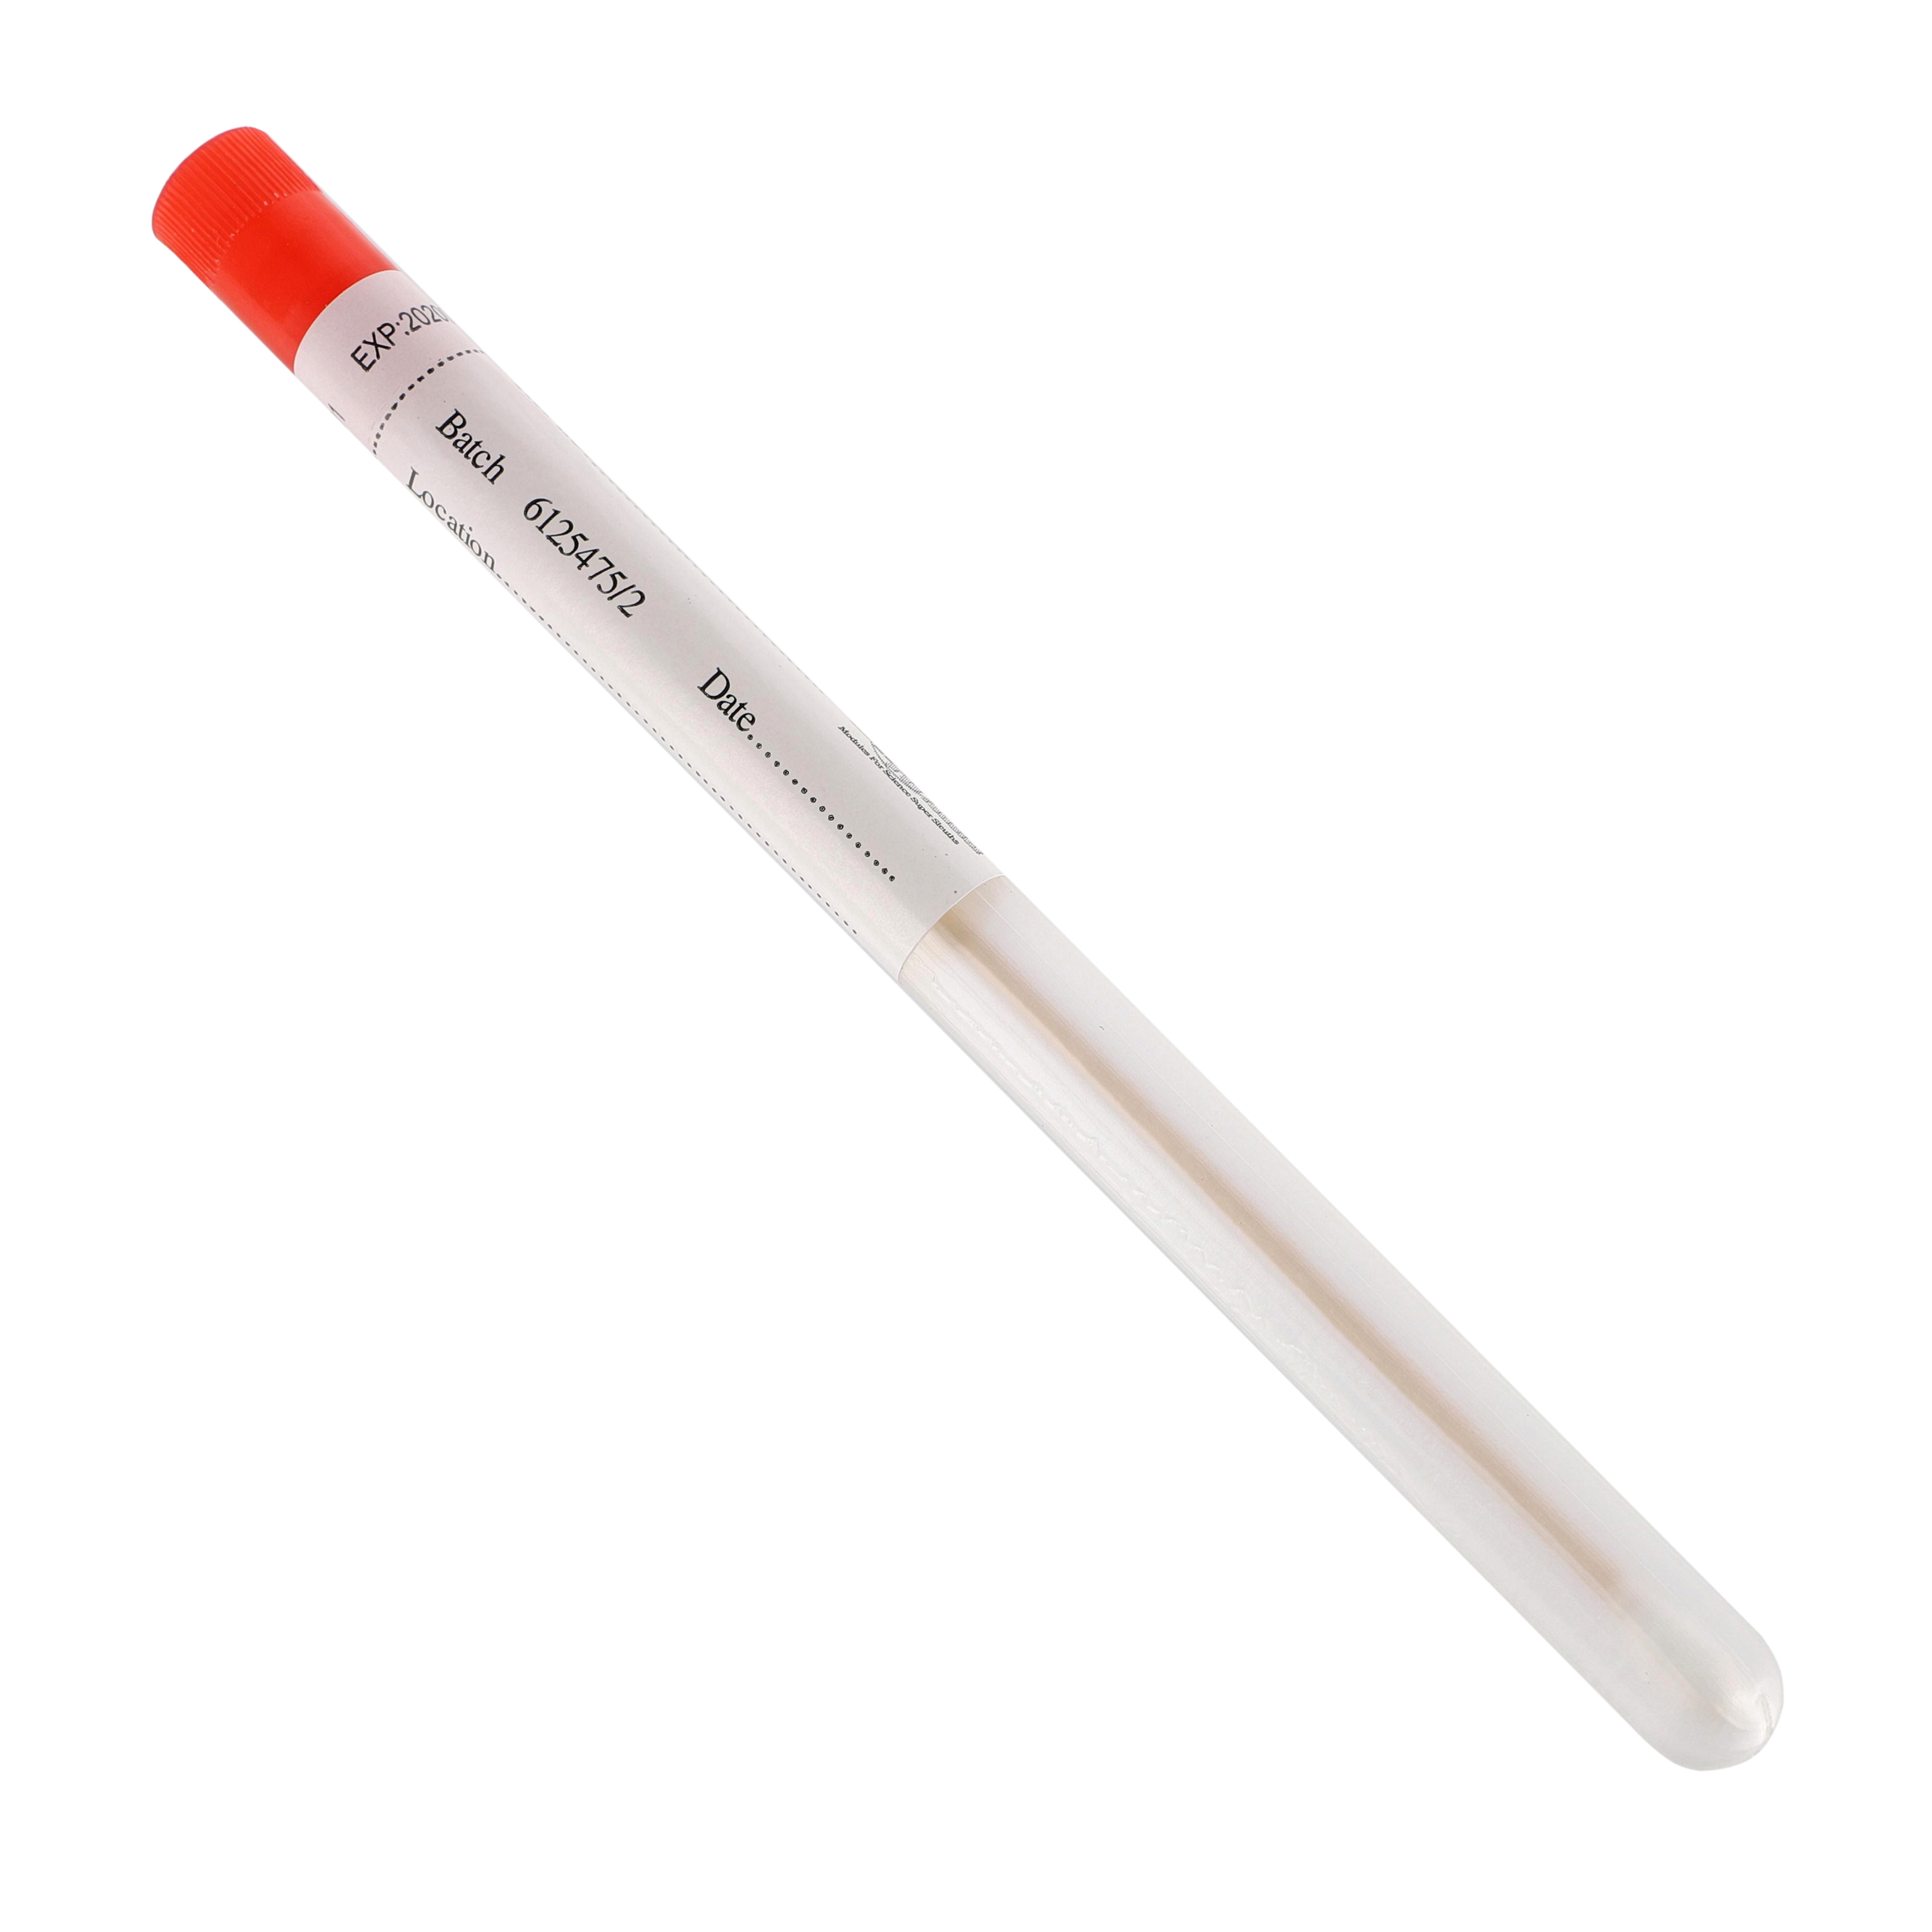 Evidence Collection Swabs - 10